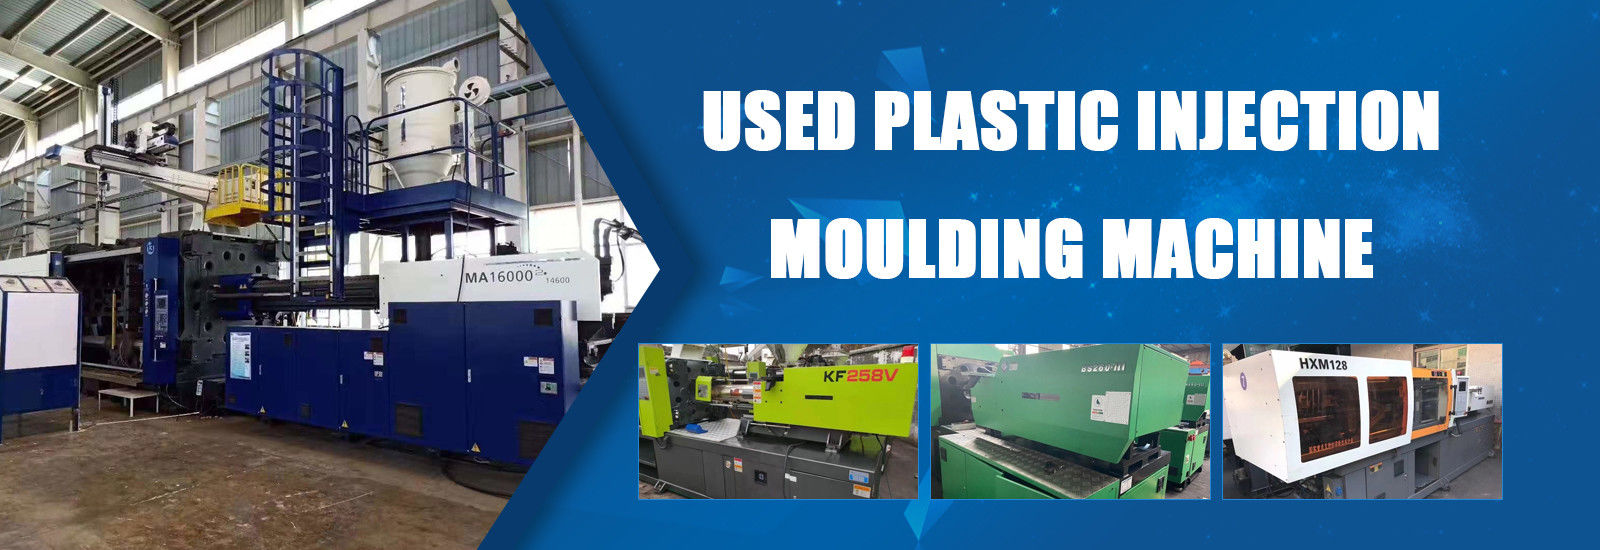 qualidade Chen Hsong Injection Molding Machine fábrica